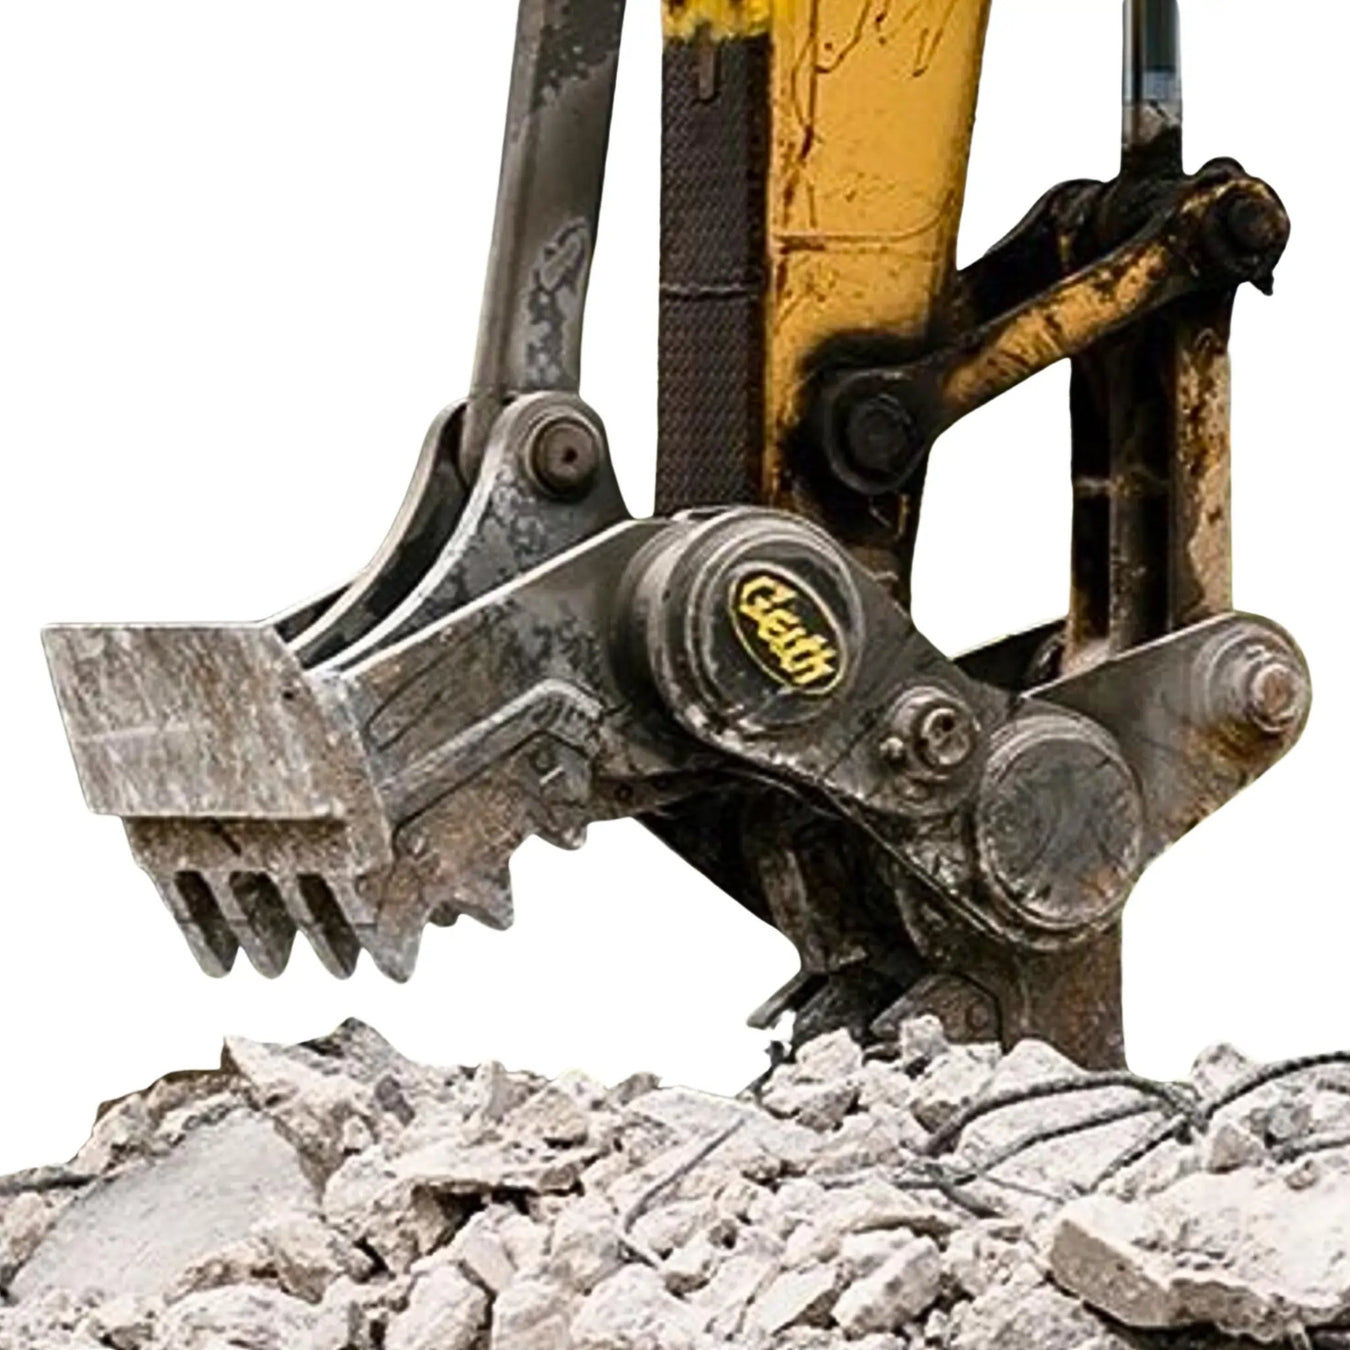 Excavator Concrete Crushers - Attachments King